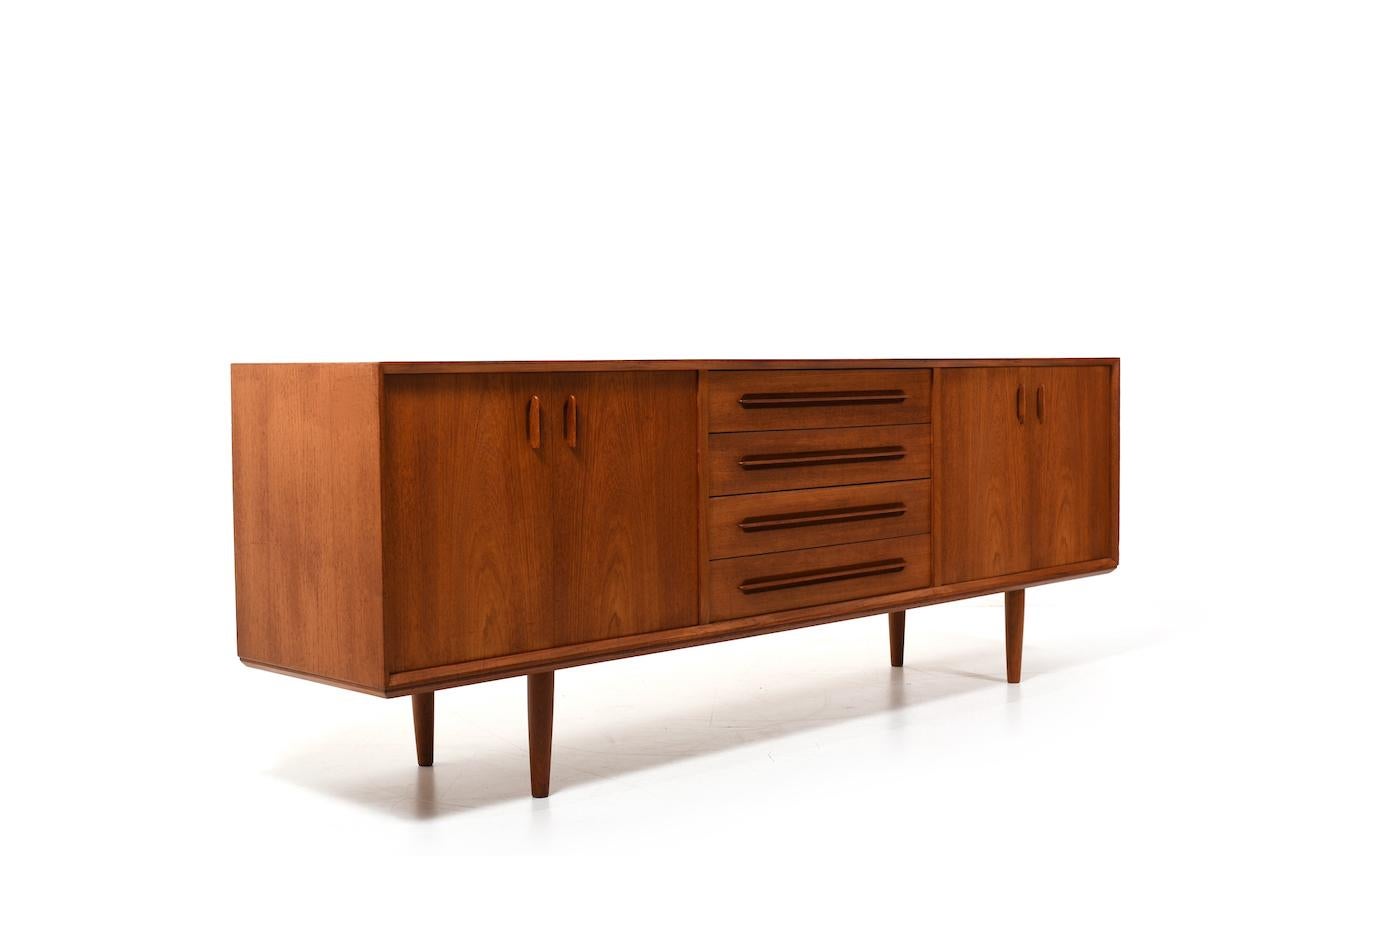 Beautiful danish teak sideboard by Ejvind A. Johansson for Gern Møbelfabrik Denmark 1960s. In front with double doors on each side and shelves behind them. In the middle a row of drawers. With beautifully crafted handles. In very good quality. In